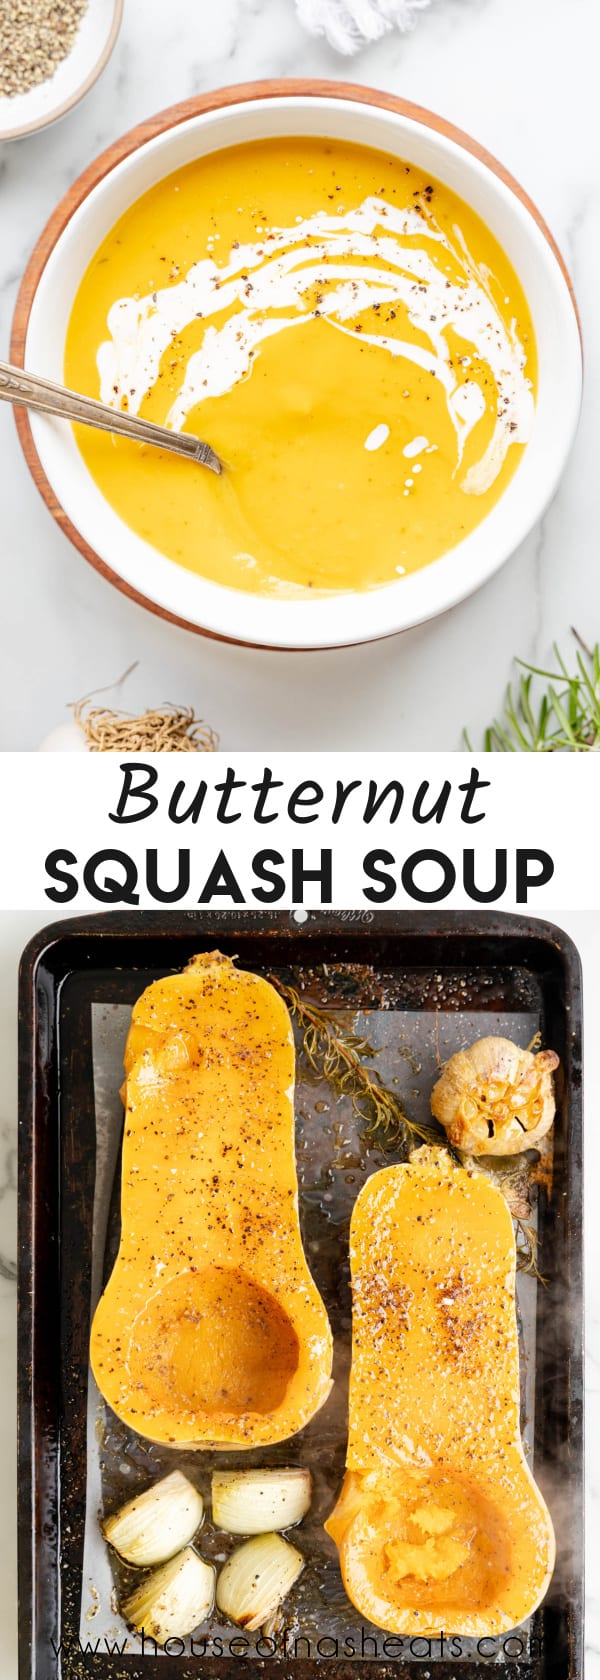 A collage of images of bowls of butternut squash soup and whole roasted butternut squash with text overlay.